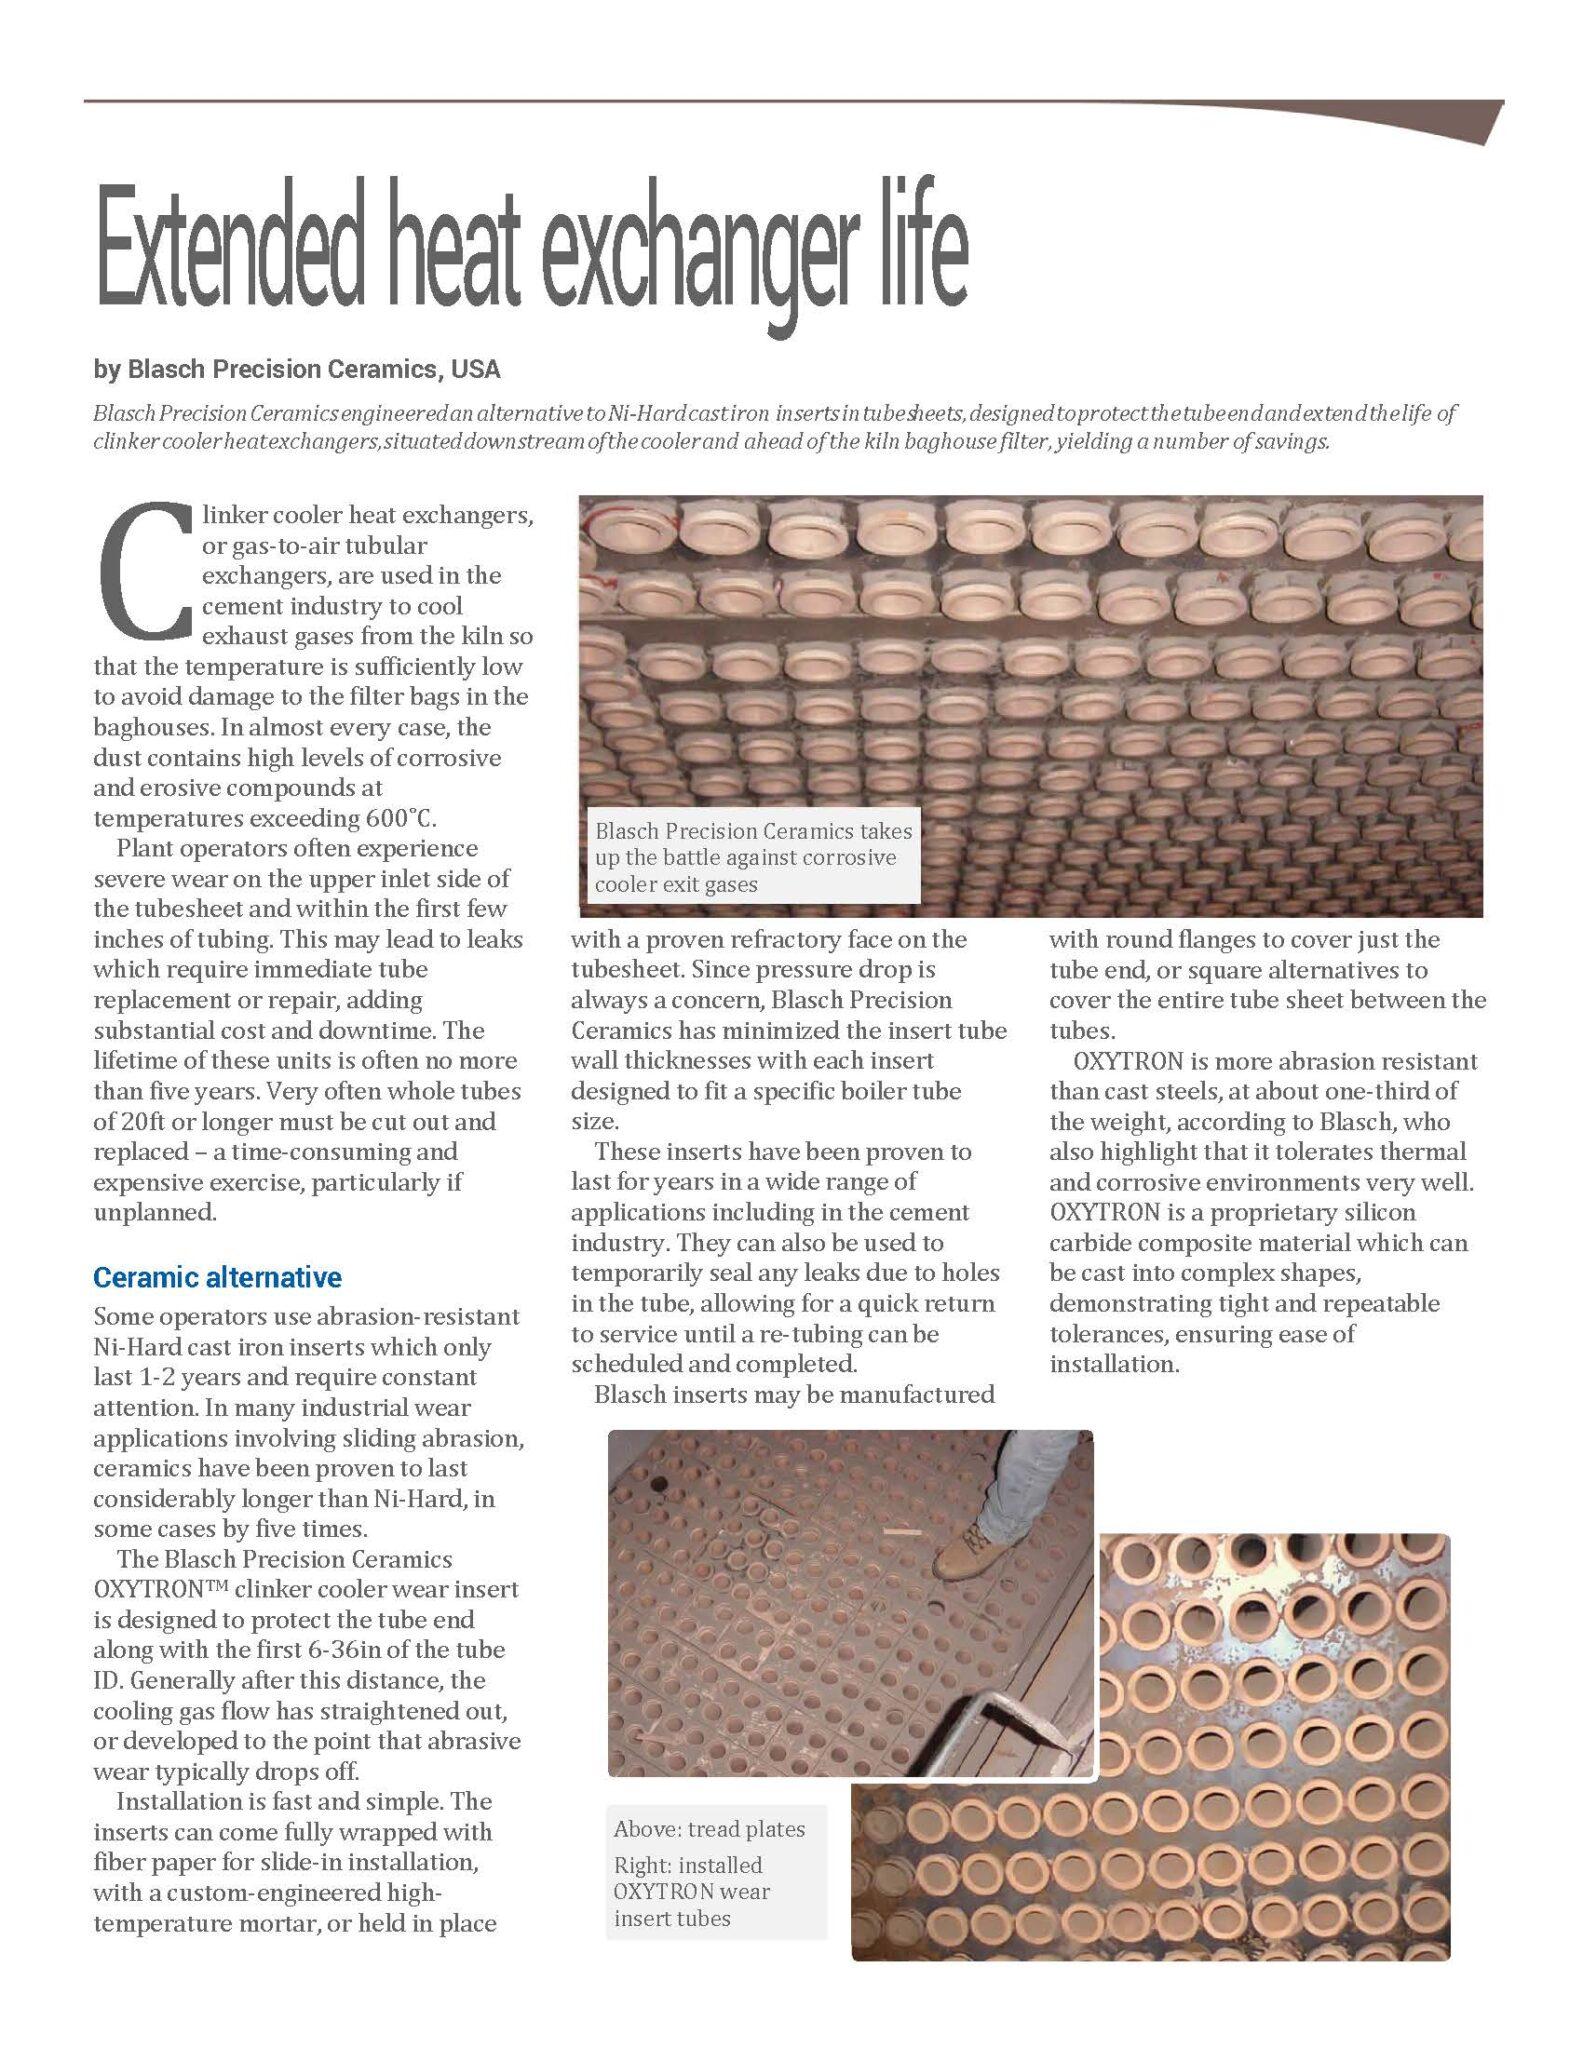 First page of "Extended heat exchanger life" white paper.